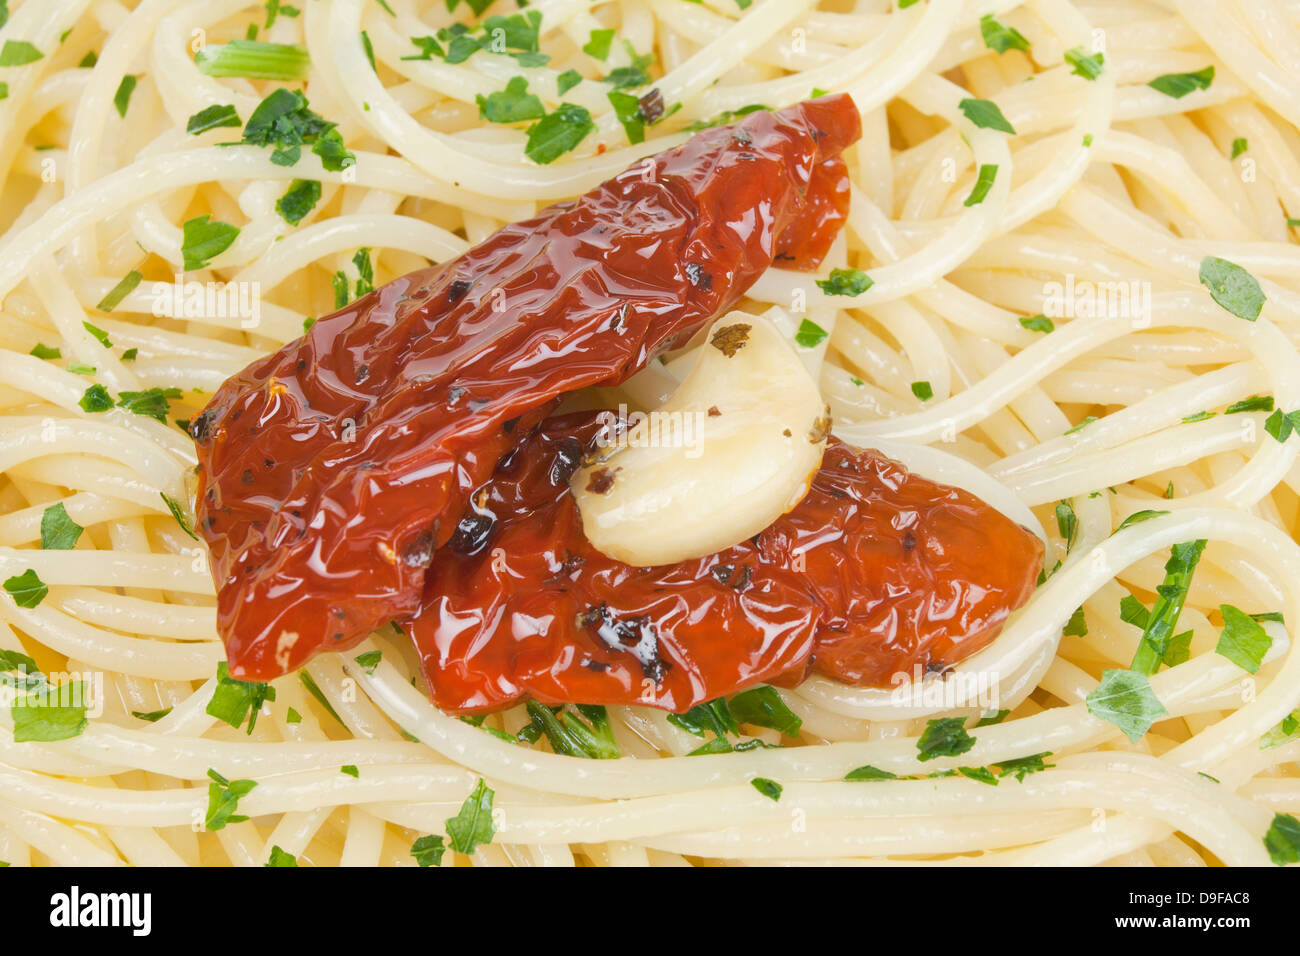 Spaghetti with inlaid tomatoes and garlic spaghetti with marinated tomatoes and garlic Stock Photo